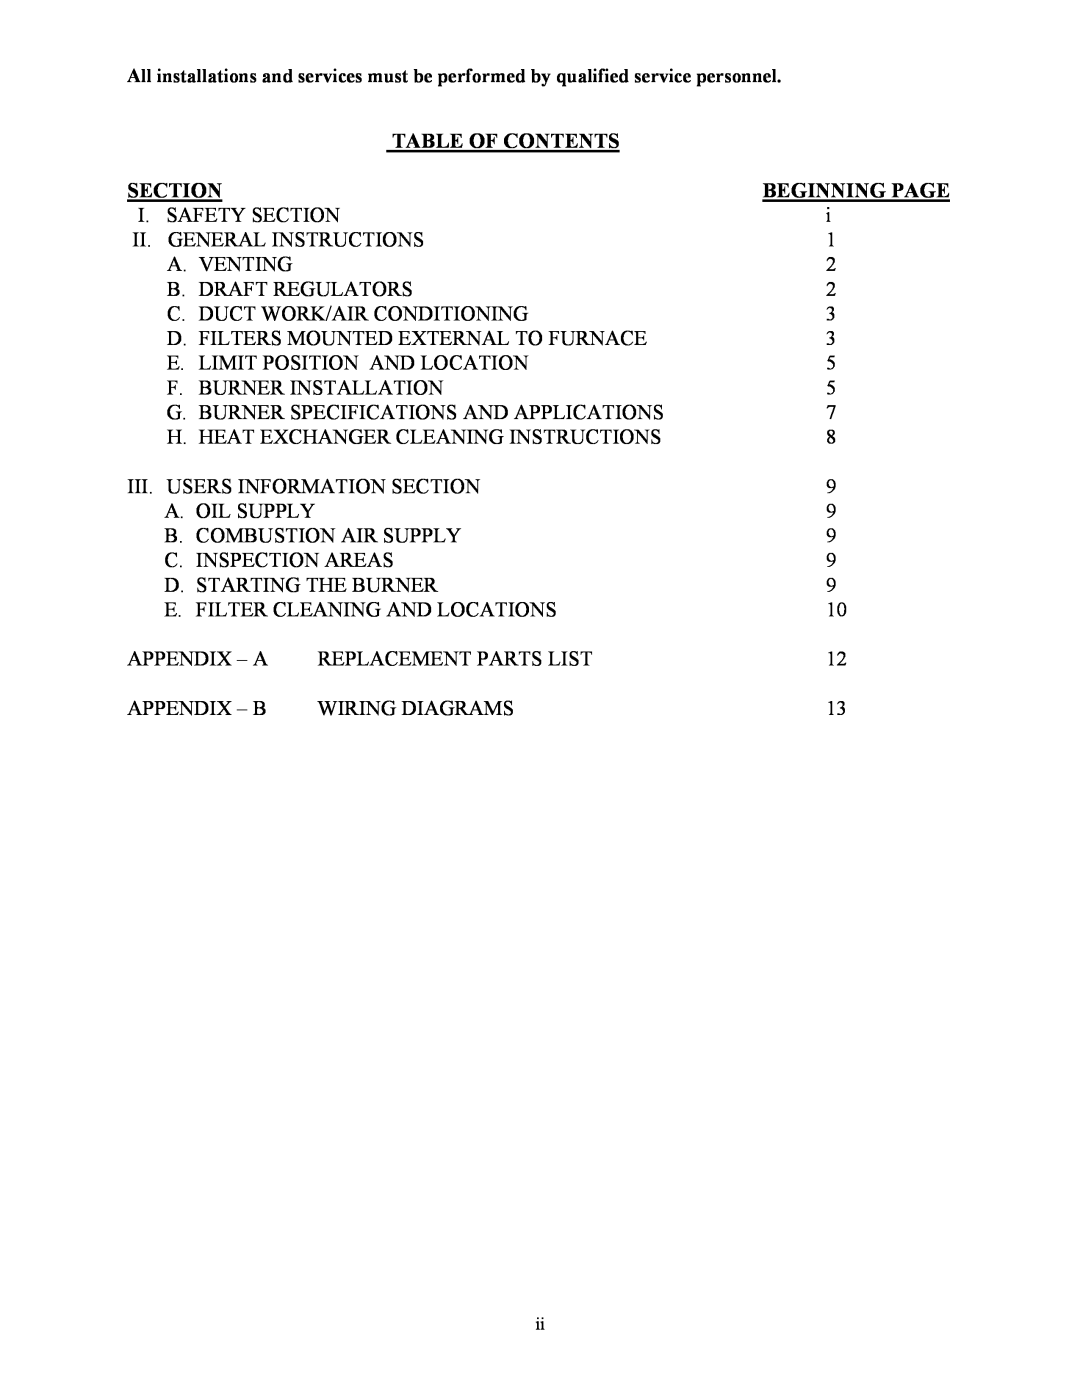 Thermo Products OH5-85DXE operation manual Table Of Contents, Section, Beginning Page 